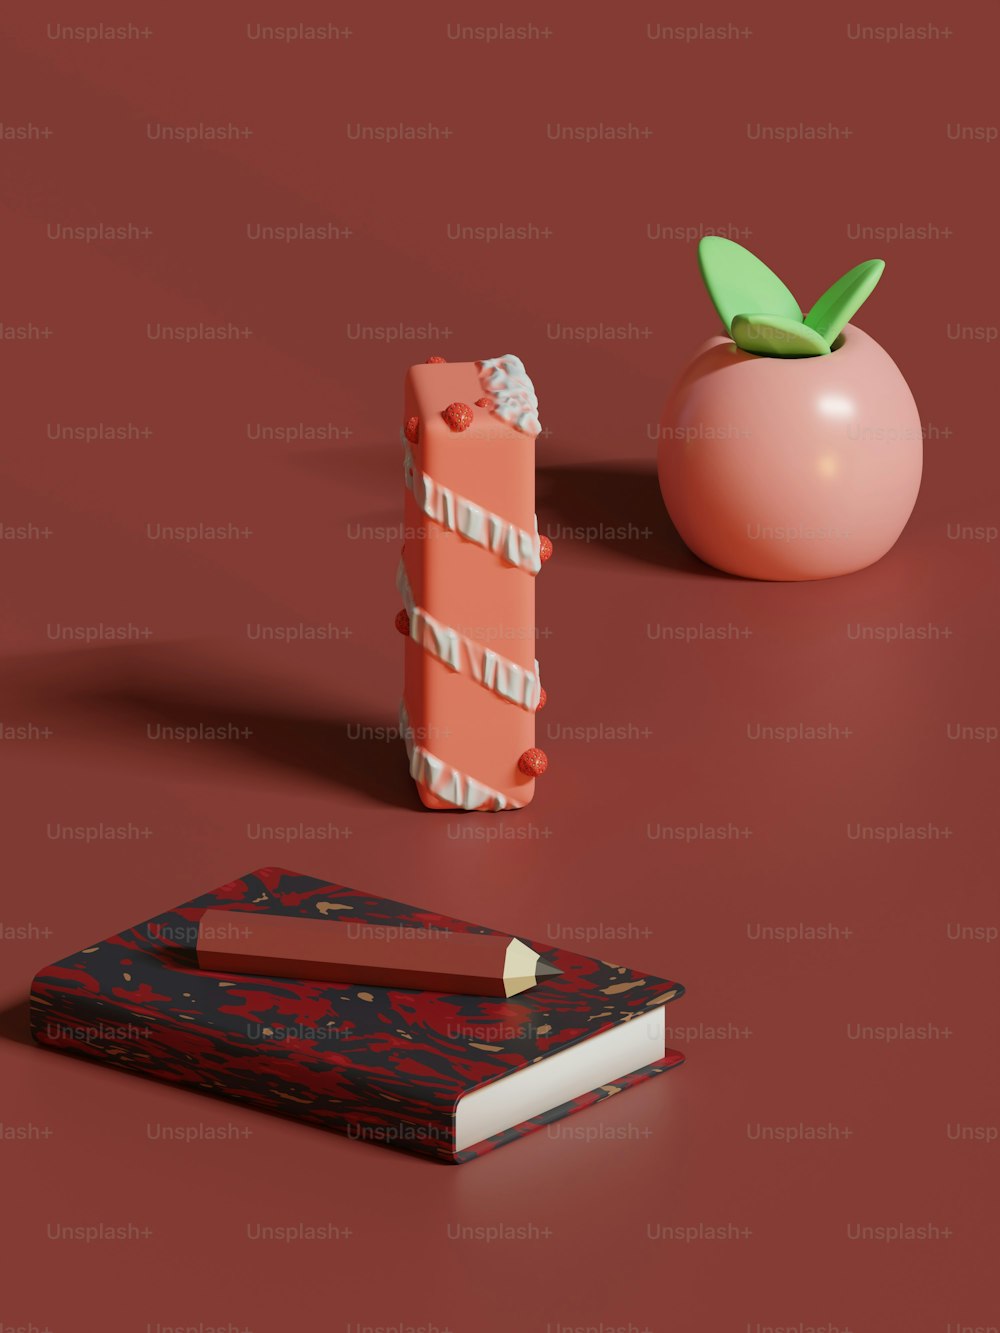 a tomato and a book on a red surface